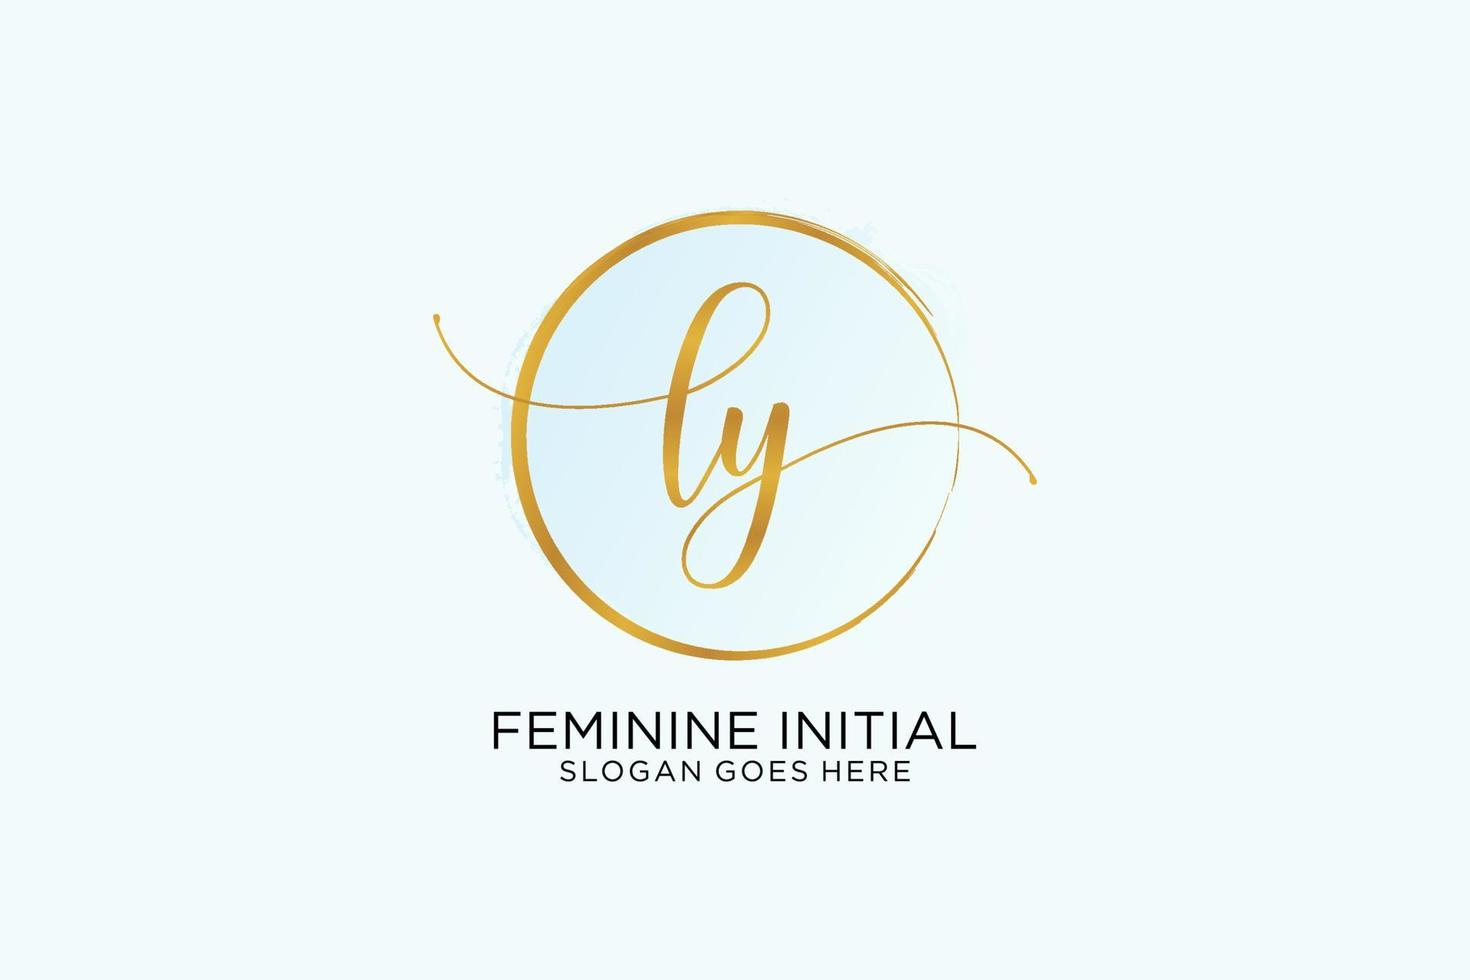 Initial LY handwriting logo with circle template vector signature, wedding, fashion, floral and botanical with creative template.